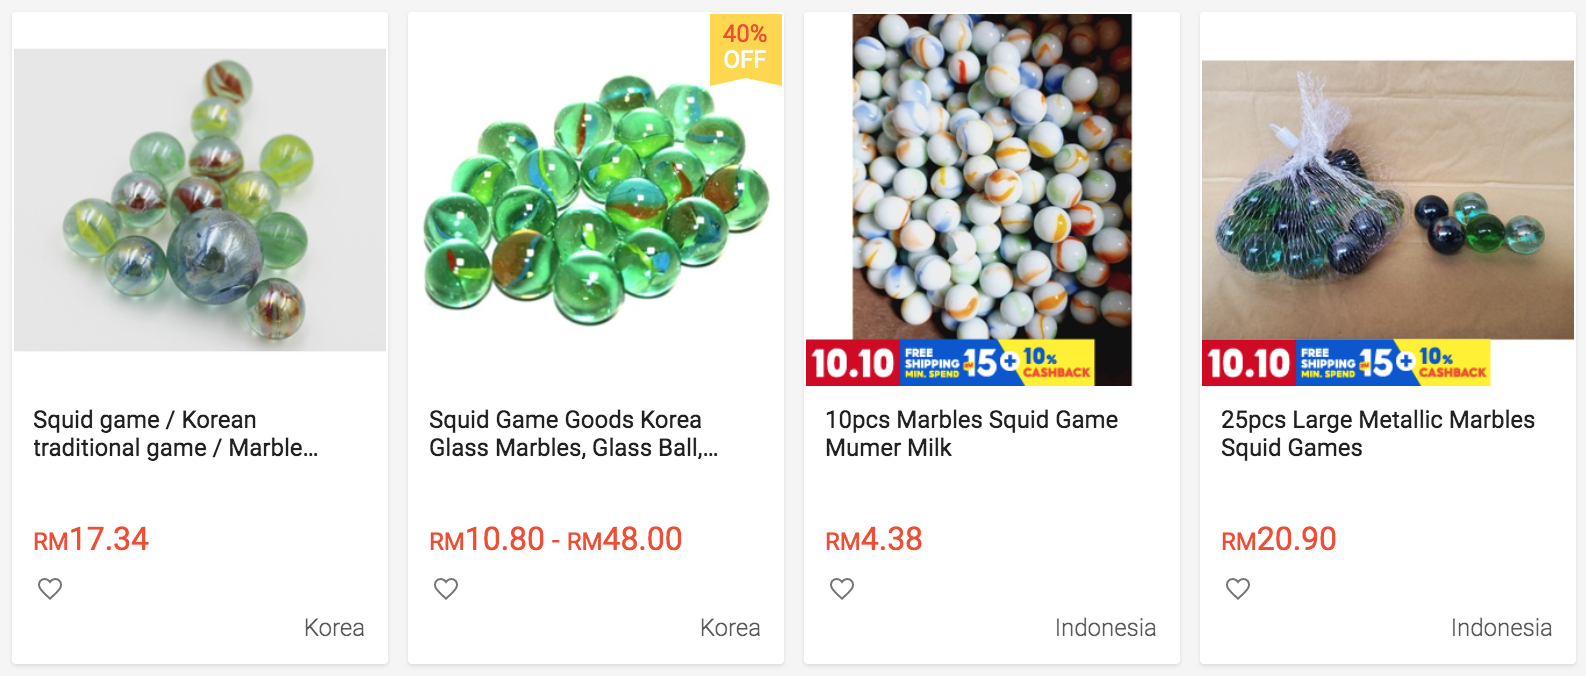 Squid Game merchandise on Shopee - marbles